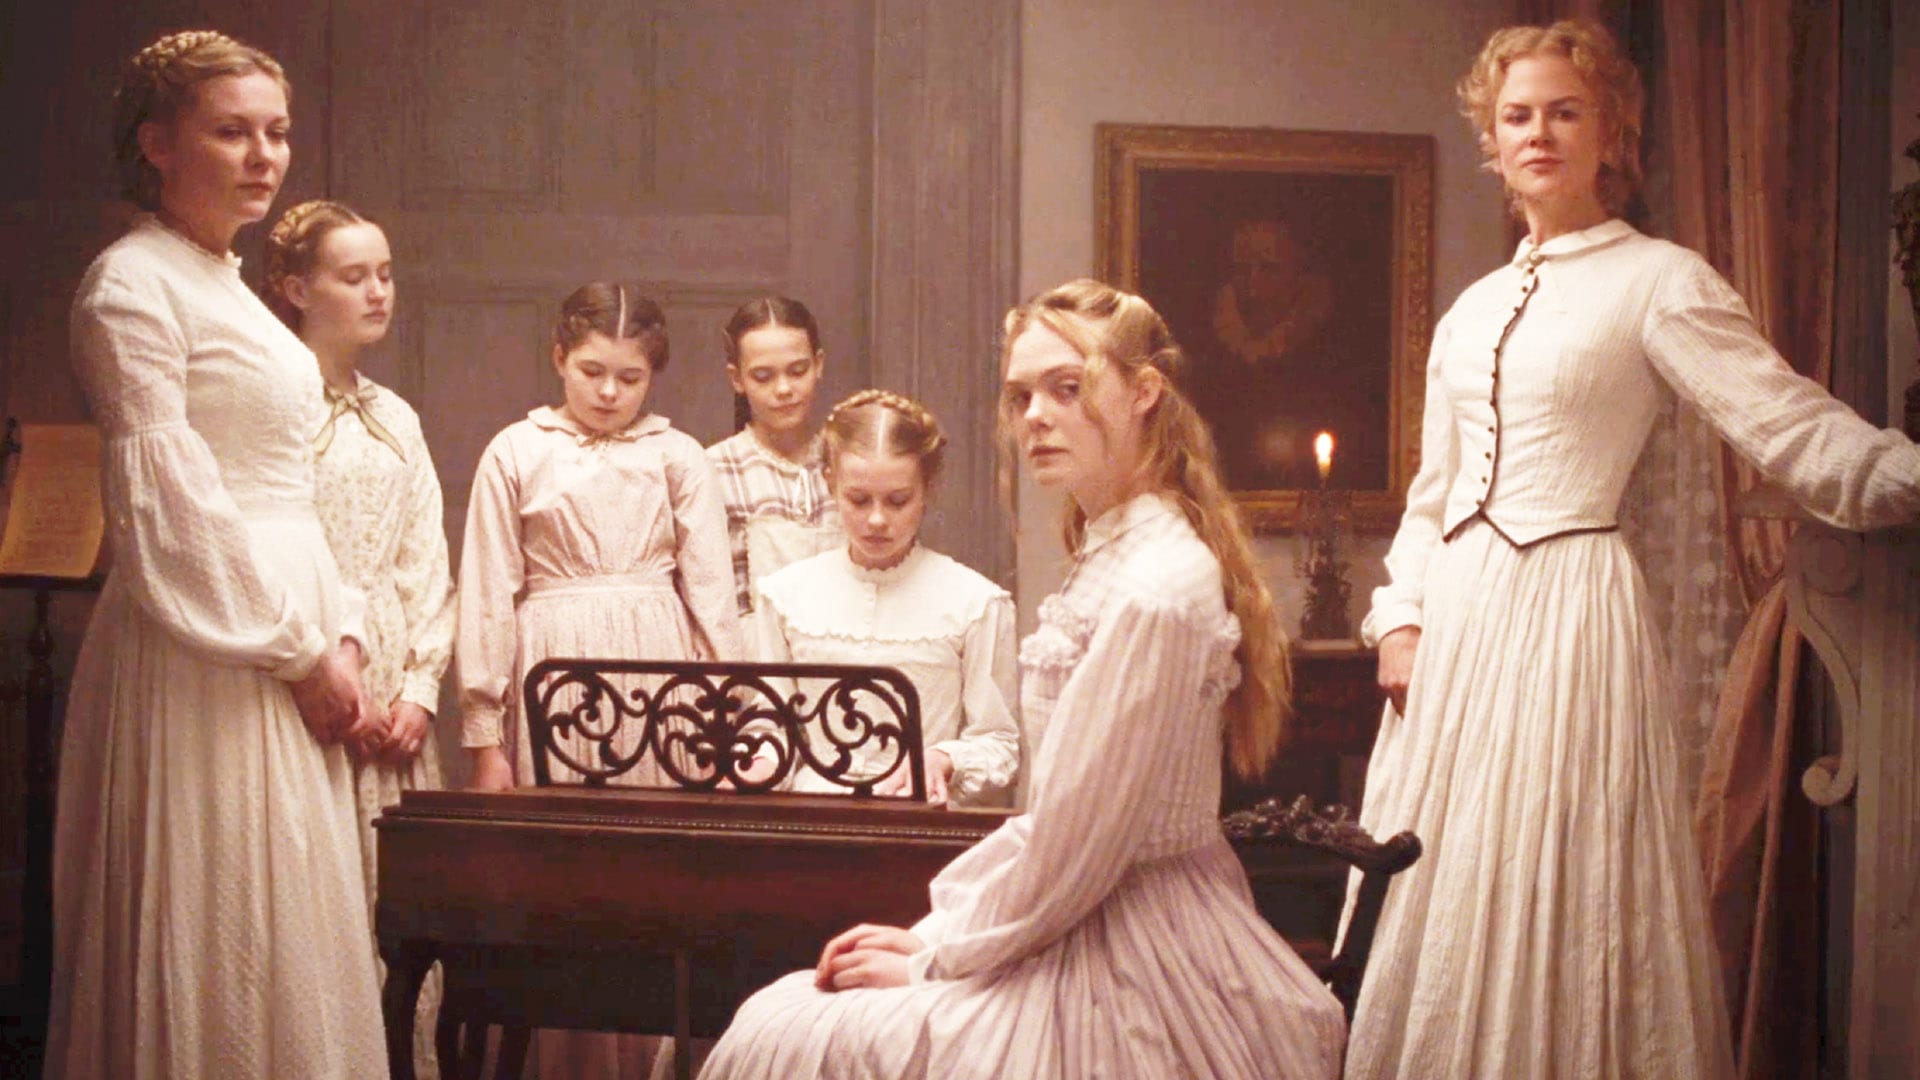 THE BEGUILED (1971) vs THE BEGUILED (2017)